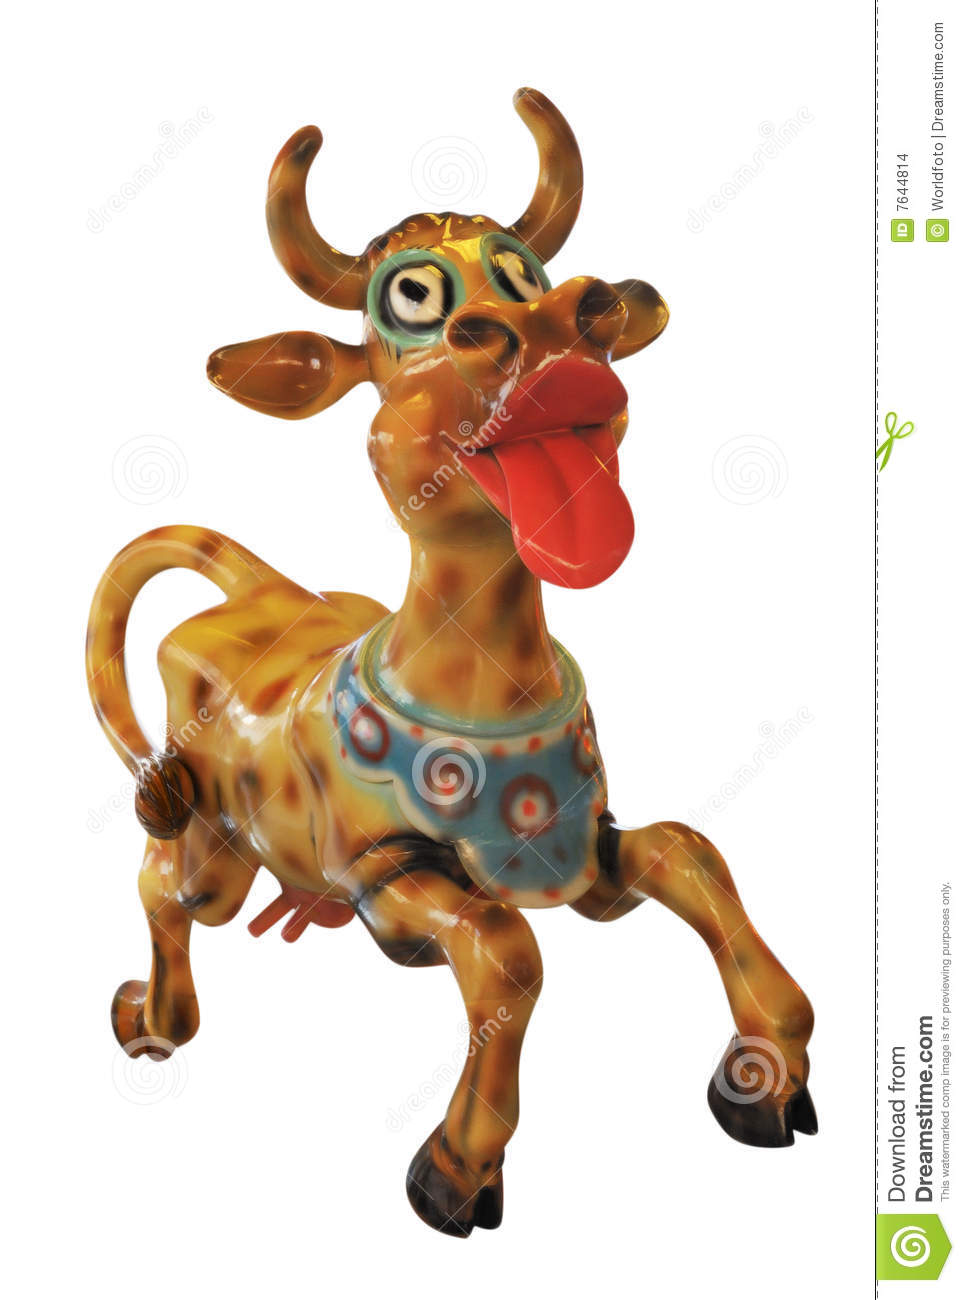 Crazy Cow Stock Images   Image  7644814